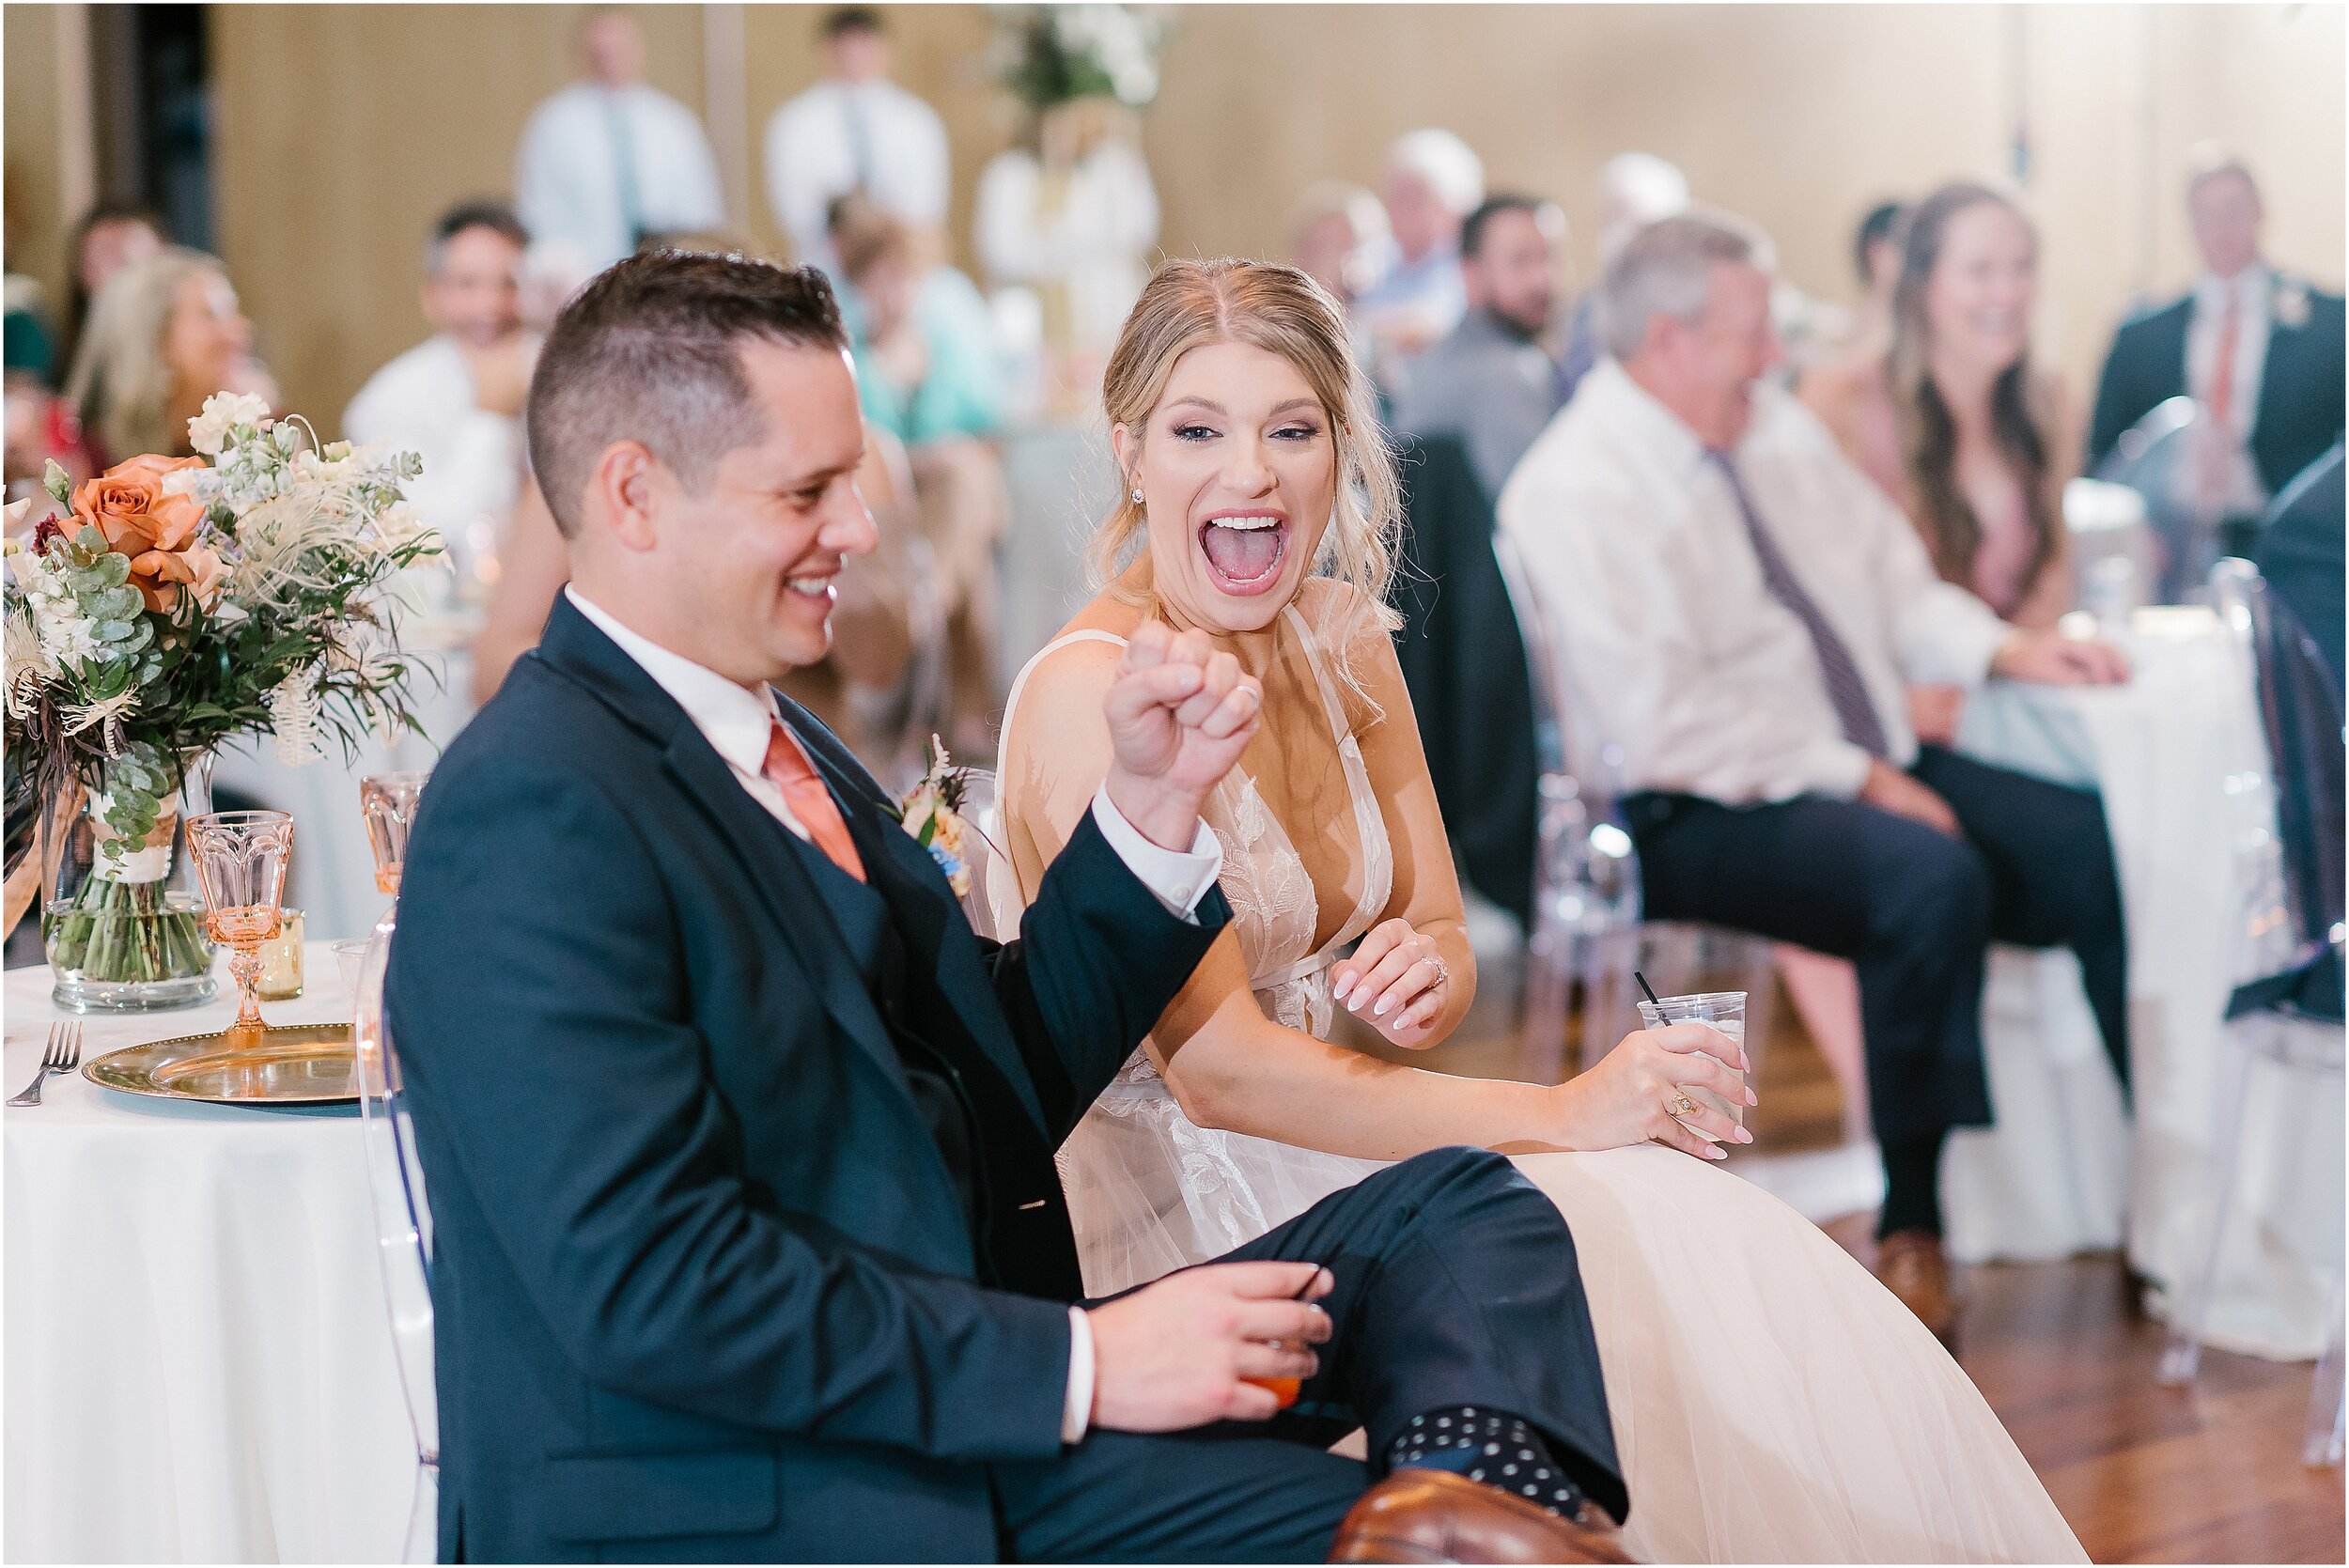 Rebecca Shehorn Photography Colleen and Kyle Inn at Irwin Gardens Wedding-870_The Commons Columbus Inn at Irwin Garden Indianapolis Wedding Photographer.jpg